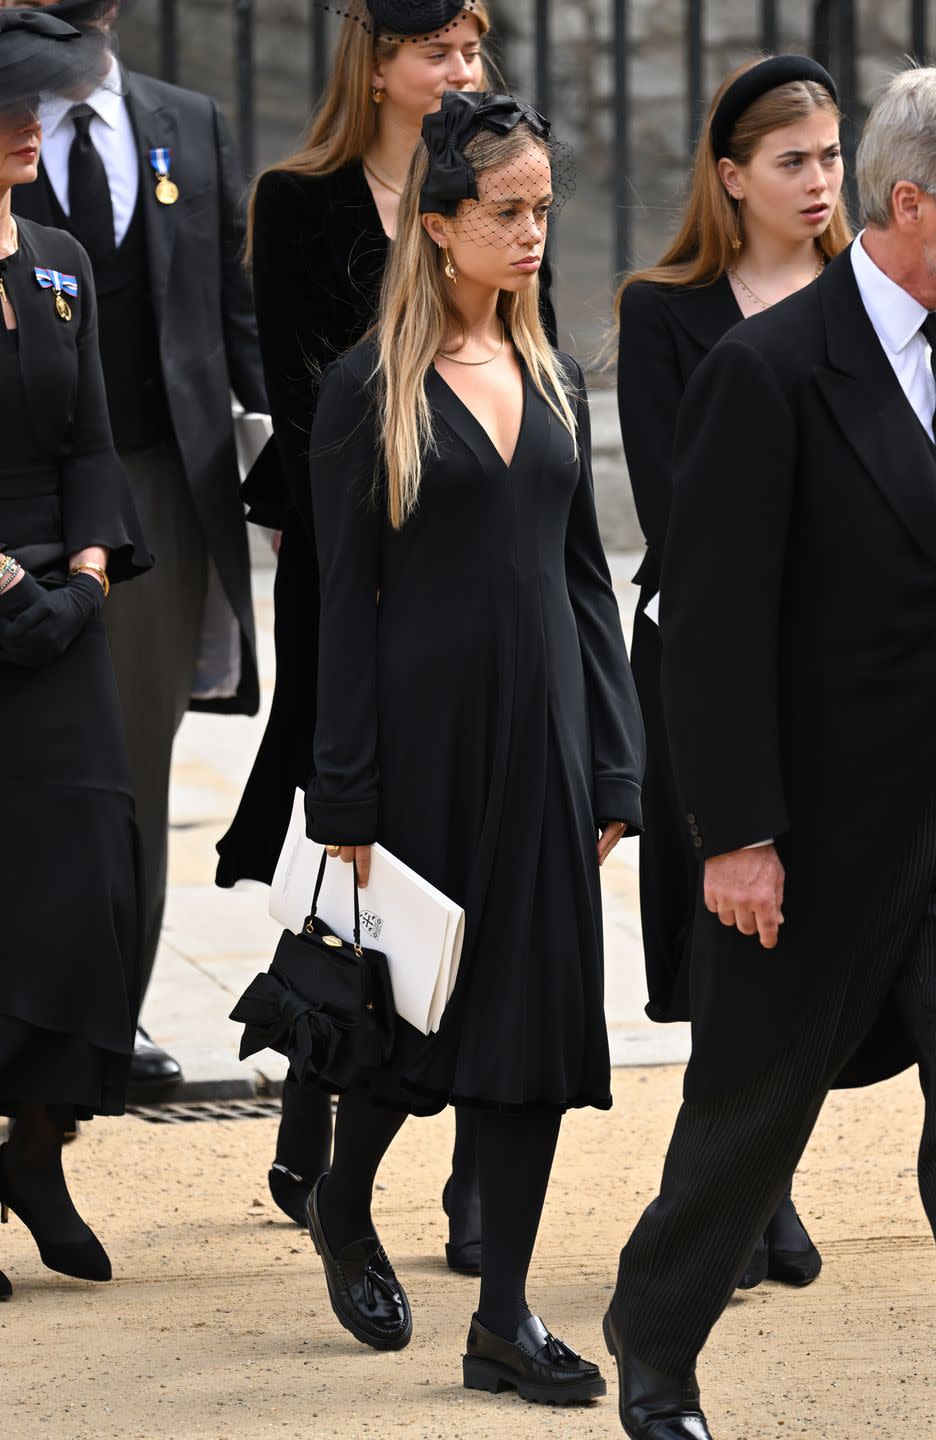 london, england september 19 lady amelia windsor during the state funeral of queen elizabeth ii at westminster abbey on september 19, 2022 in london, england elizabeth alexandra mary windsor was born in bruton street, mayfair, london on 21 april 1926 she married prince philip in 1947 and ascended the throne of the united kingdom and commonwealth on 6 february 1952 after the death of her father, king george vi queen elizabeth ii died at balmoral castle in scotland on september 8, 2022, and is succeeded by her eldest son, king charles iii photo by karwai tangwireimage